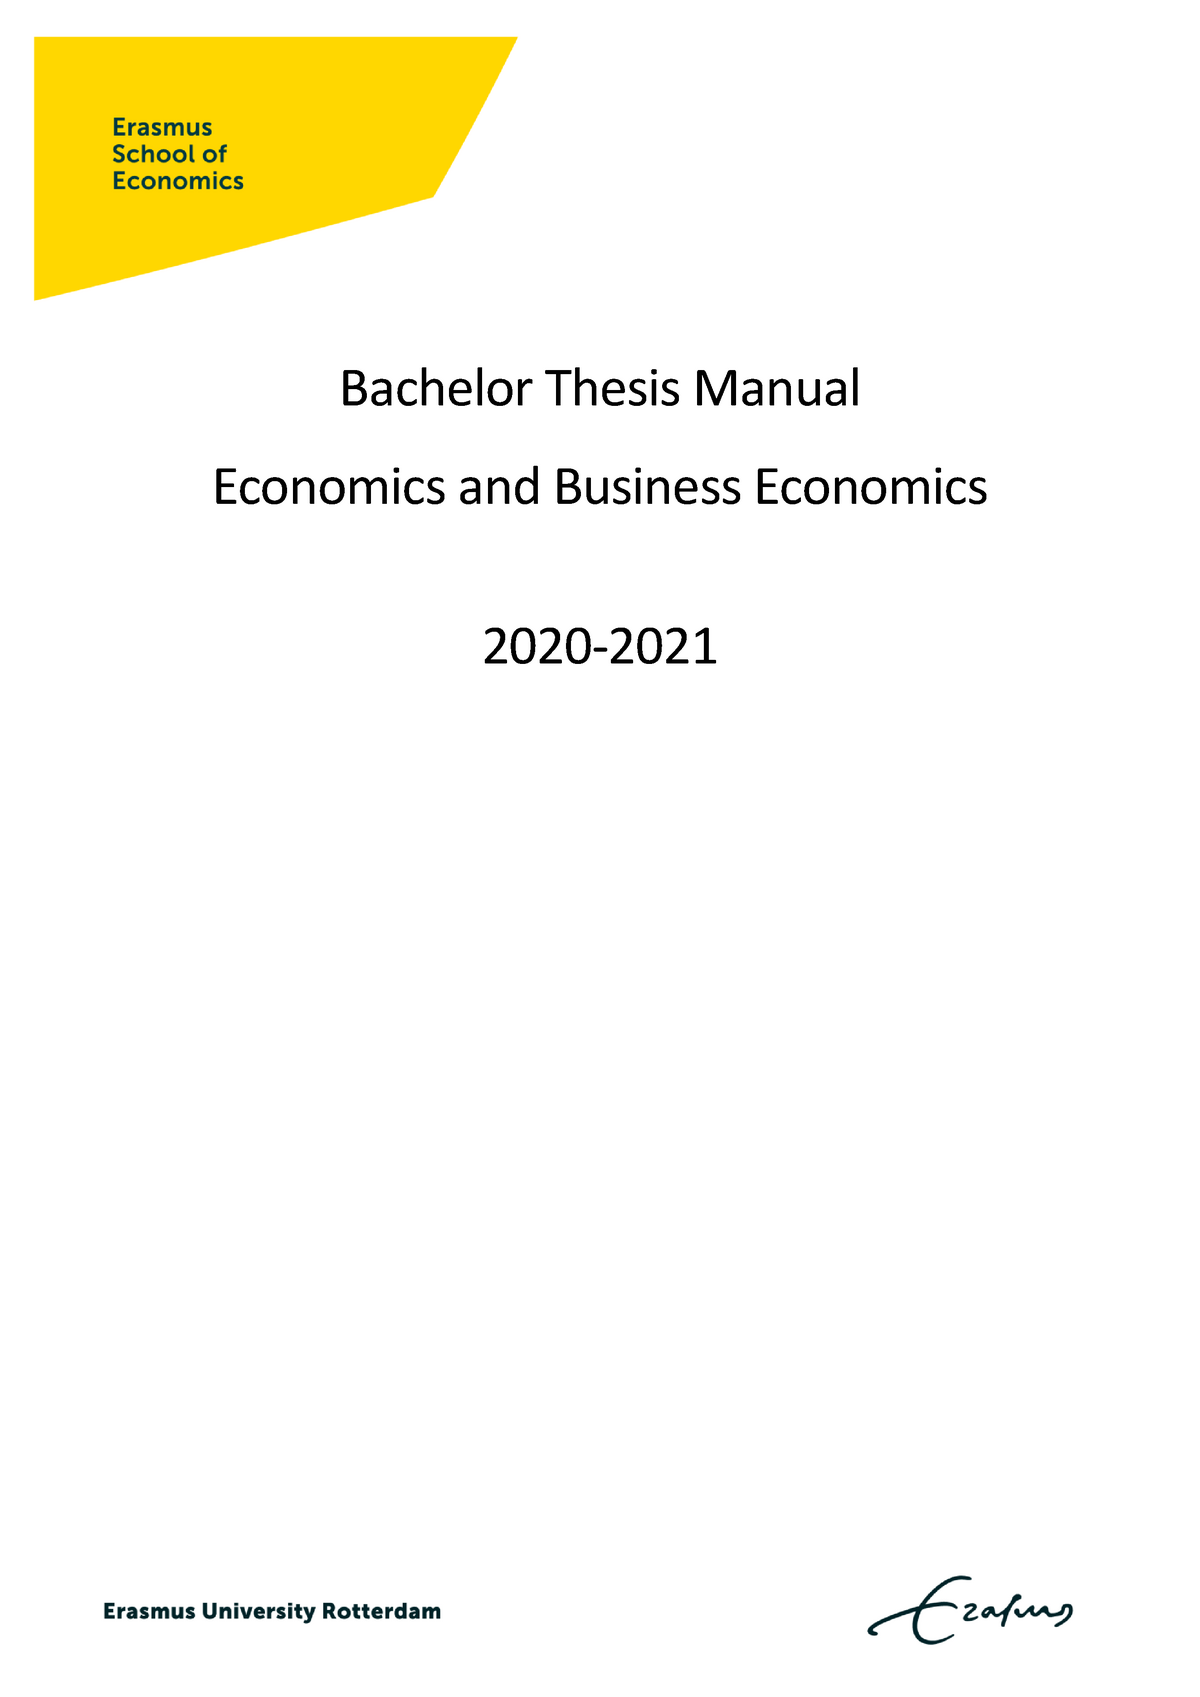 thesis related to economics